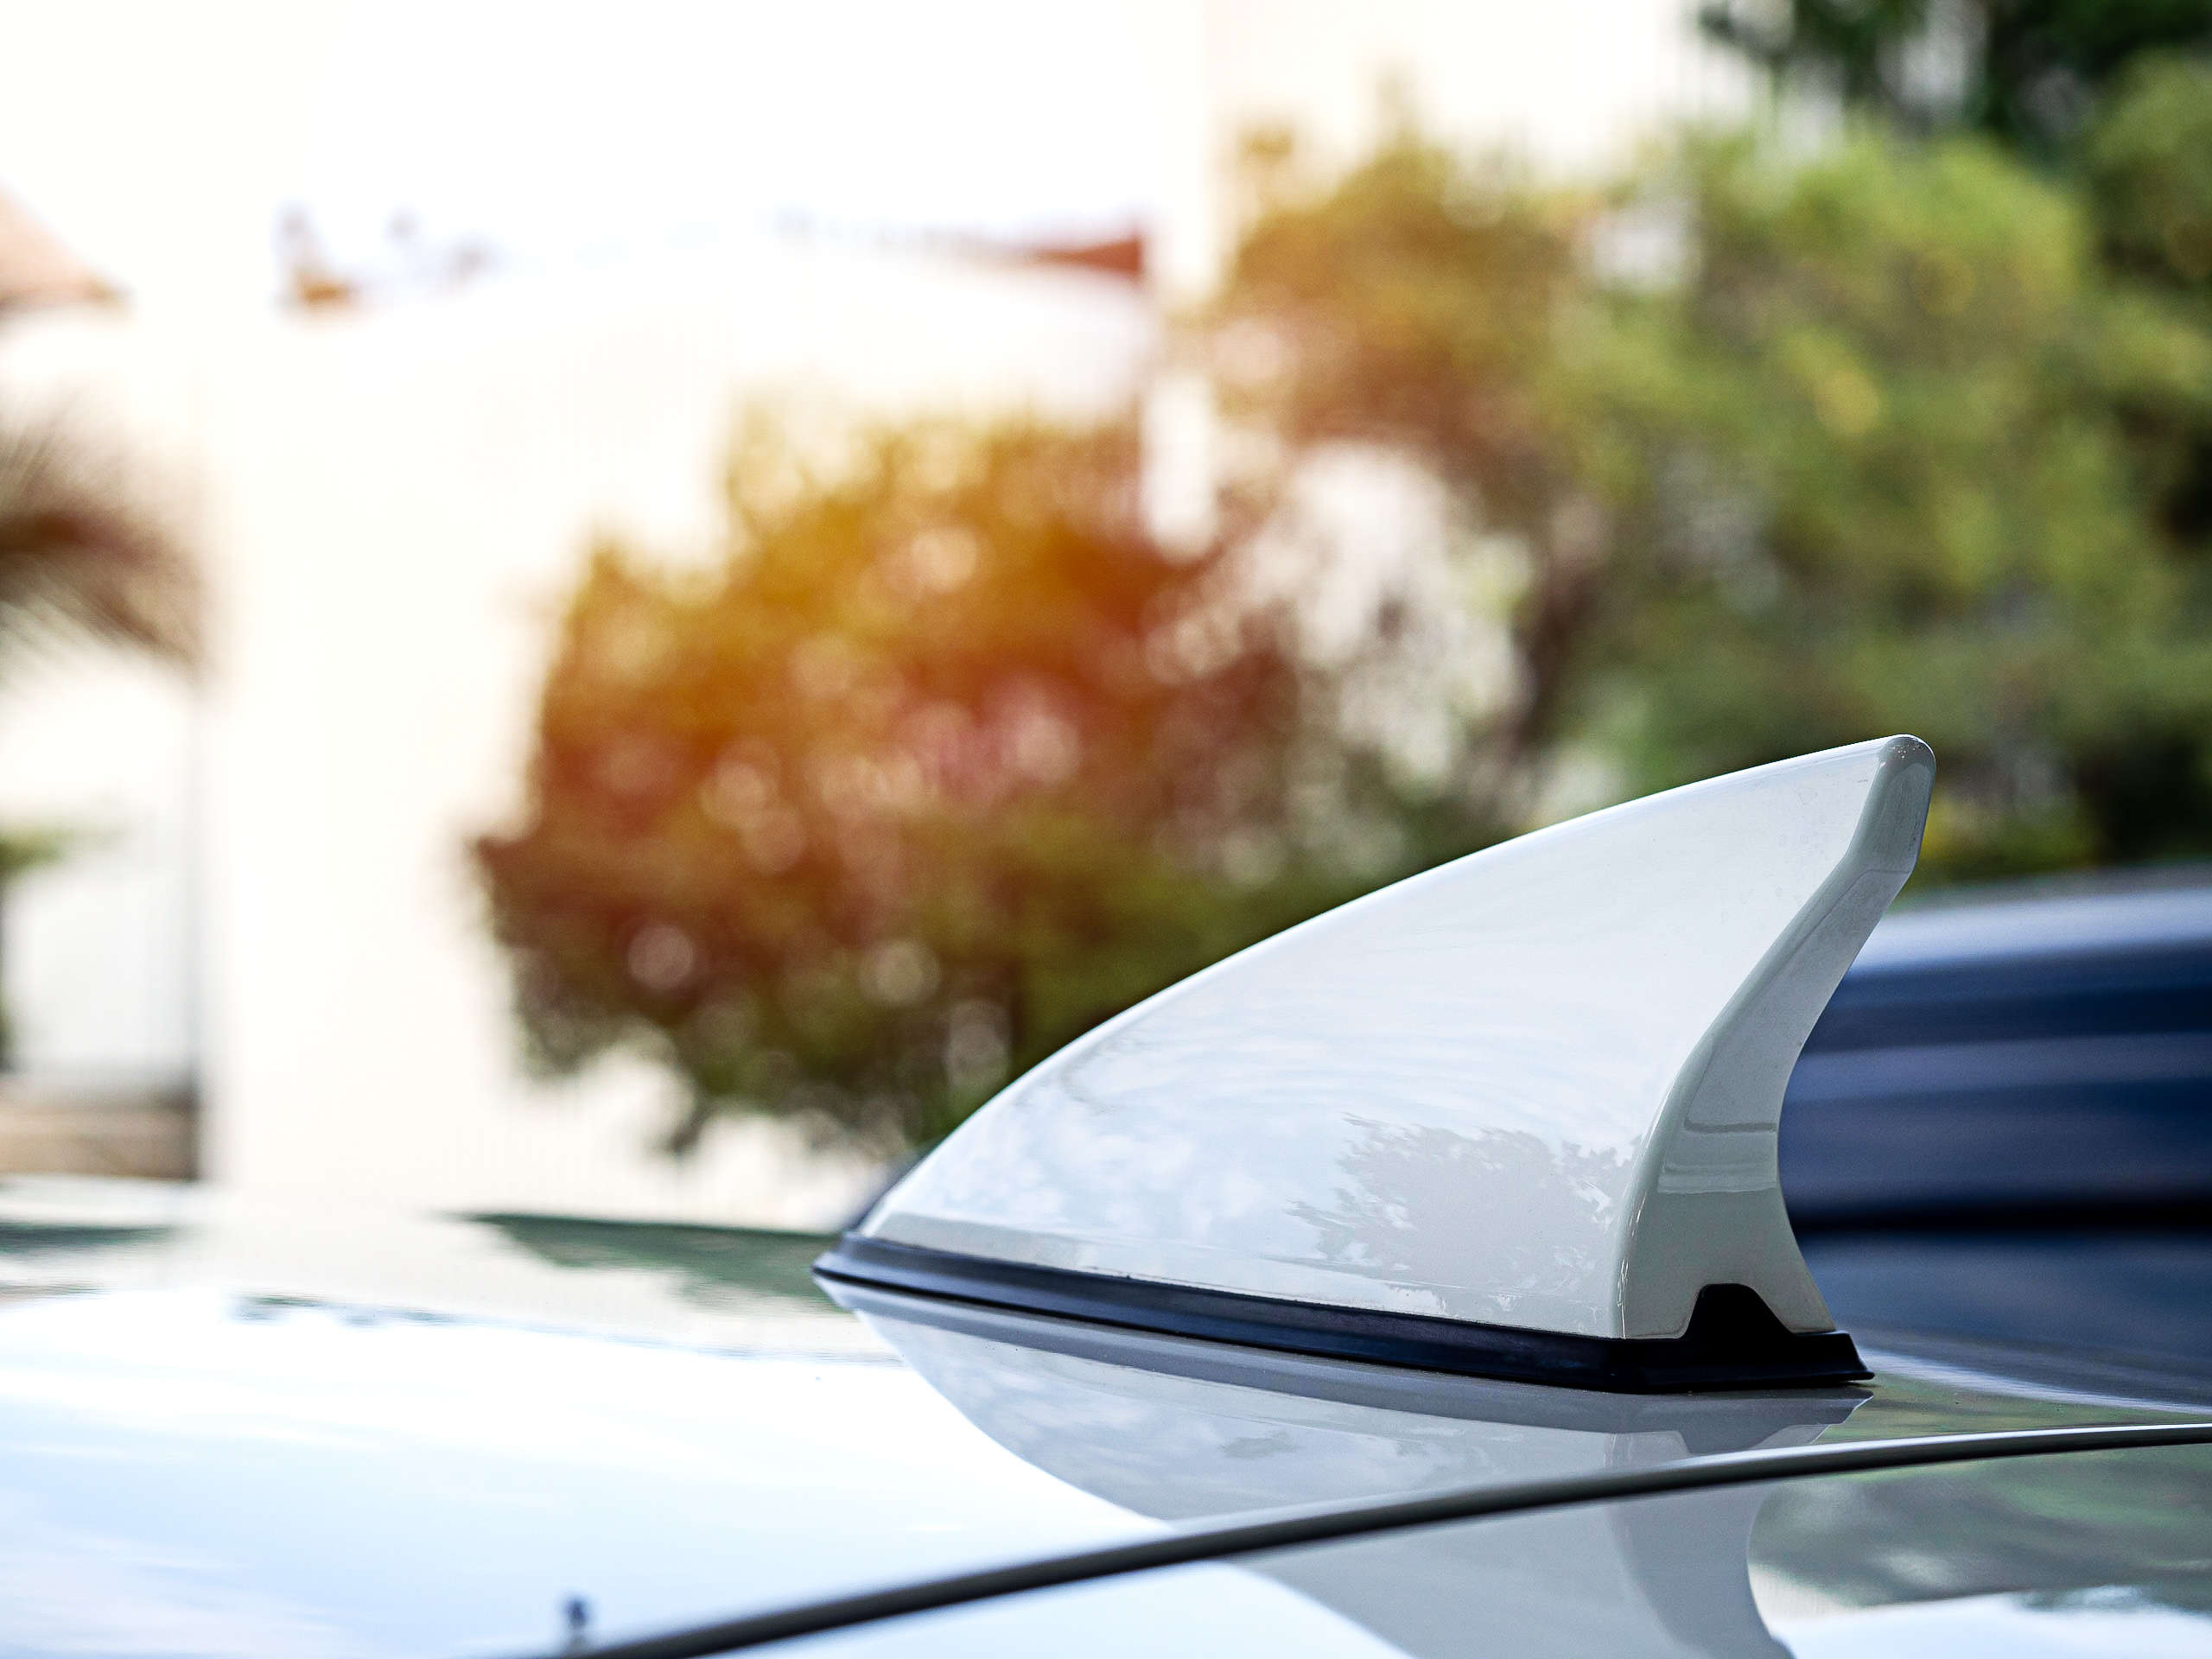 According to the auto component maker, connectivity-based safety features such as remote keyless entry, V2V & V2X communication will spur demand for devices like antennas products and solutions,